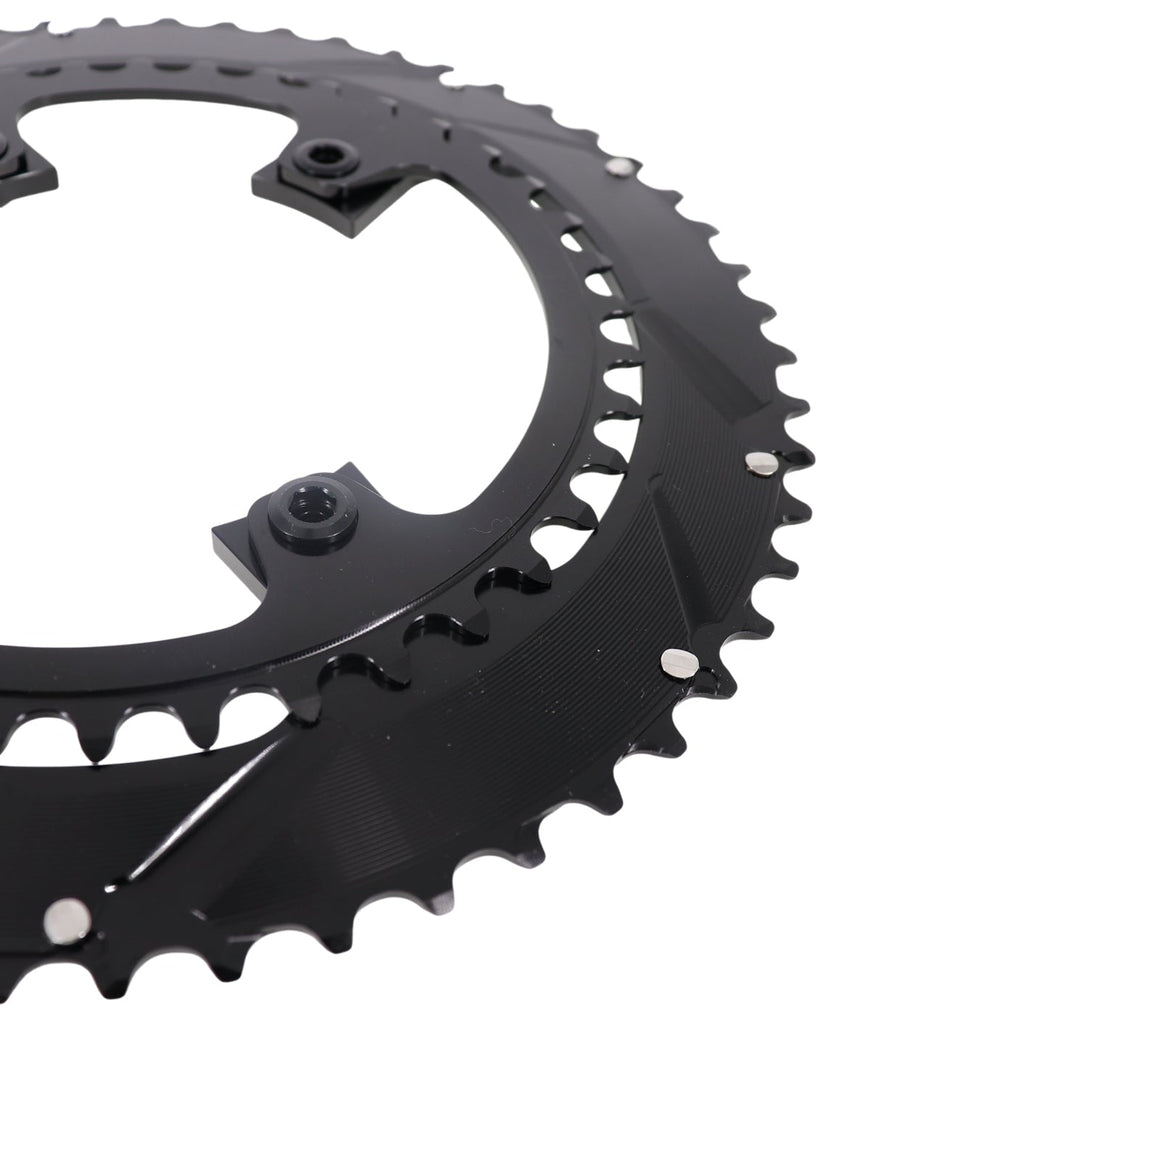 Stone 54/40 12 Speed Chainrings